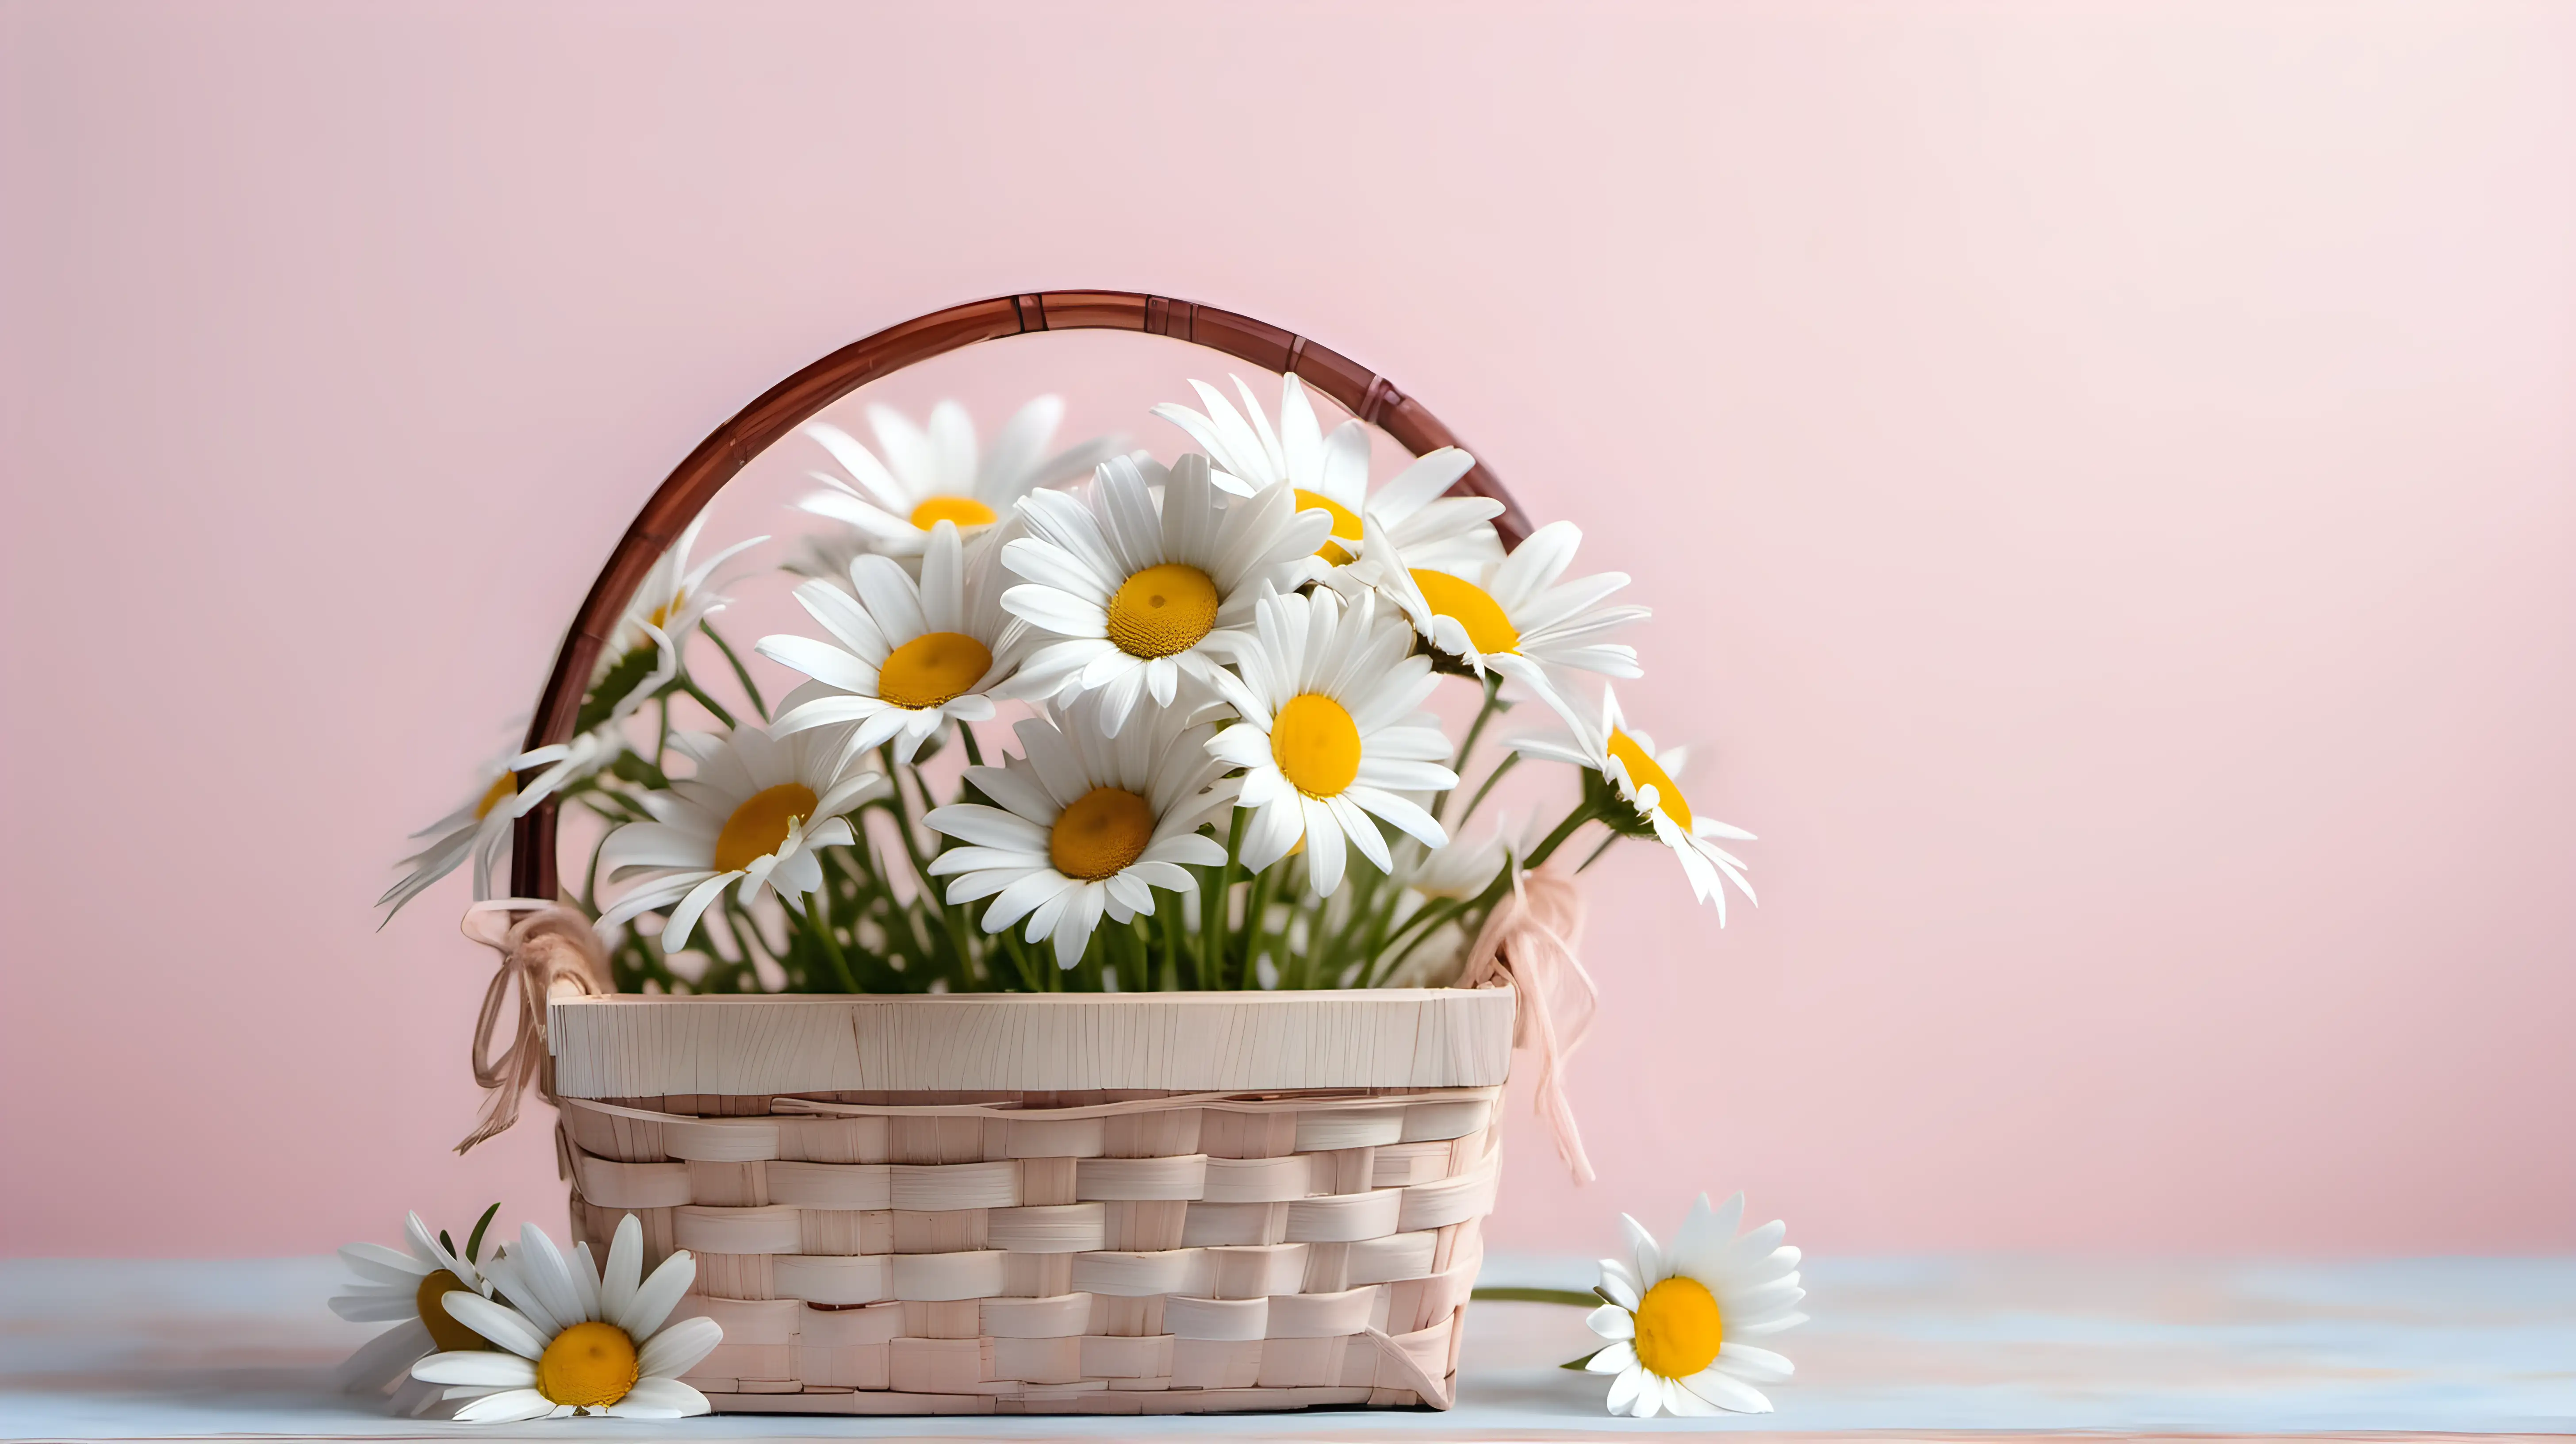 White daisy flowers in wooden basket on pink pale spring background, copy space on left